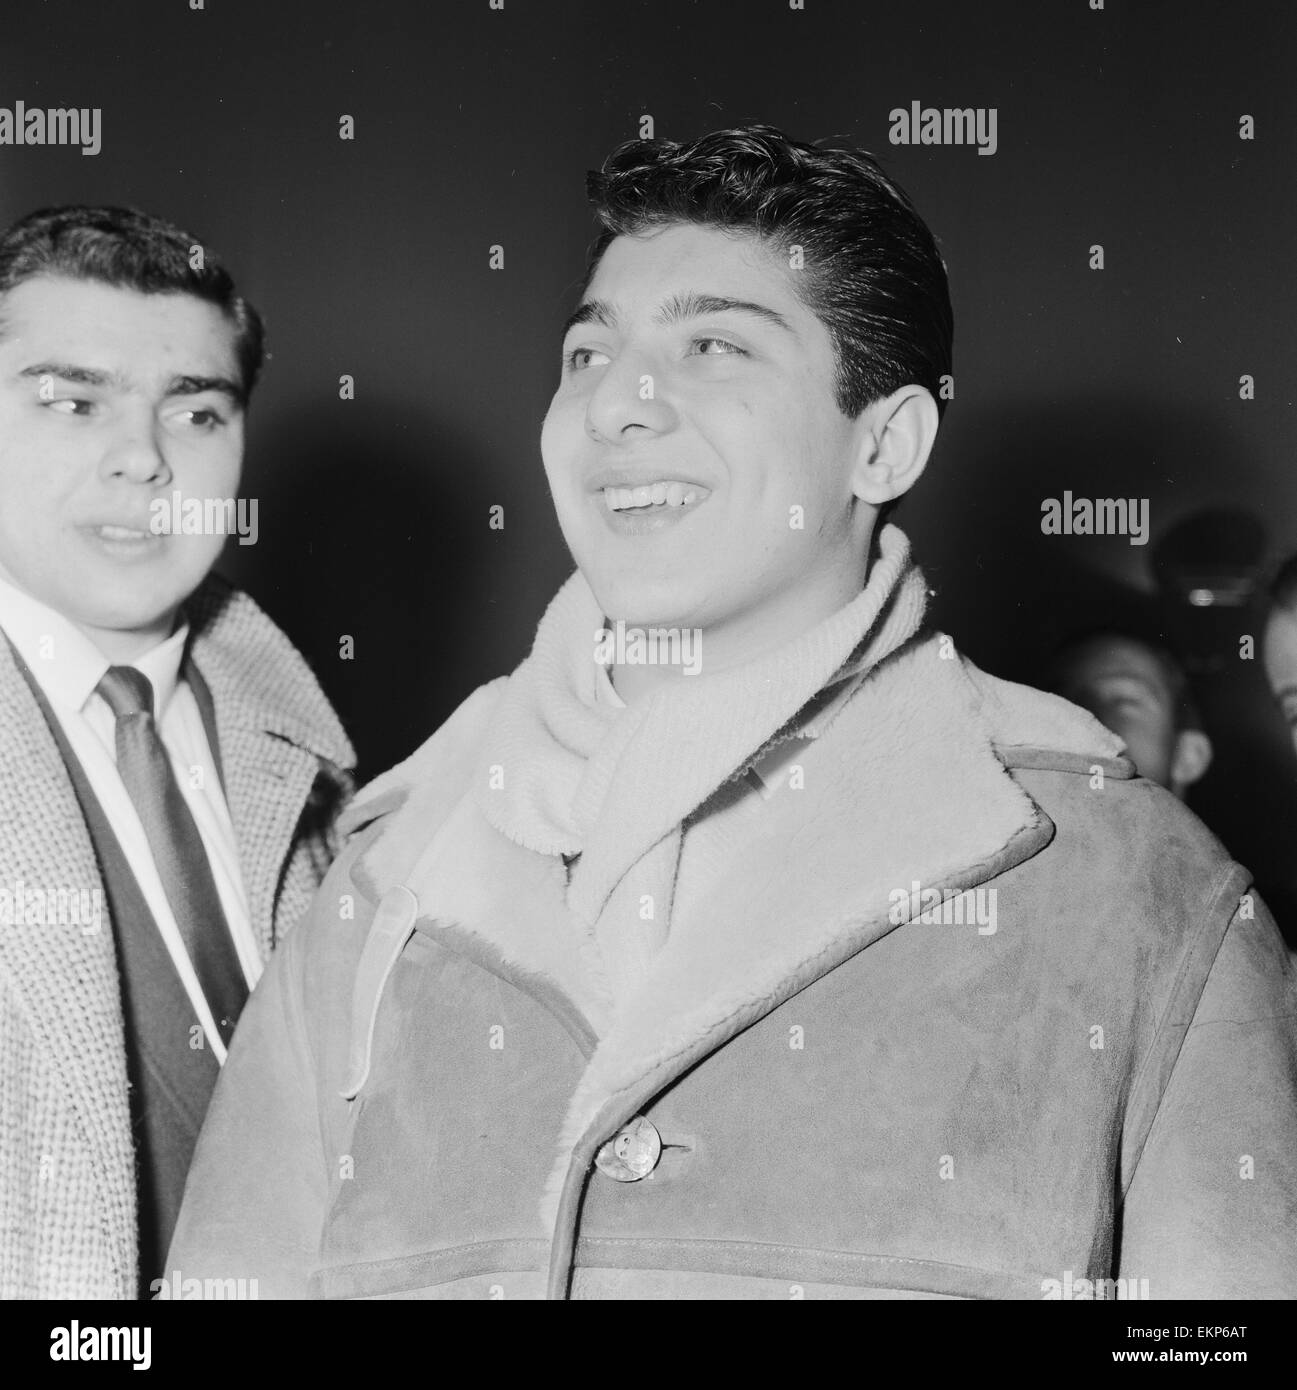 Canadian singer songwriter Paul Anka on arrival at London airport before his appearance in the television show 'The 1959 Show'. 20th January 1959. Stock Photo